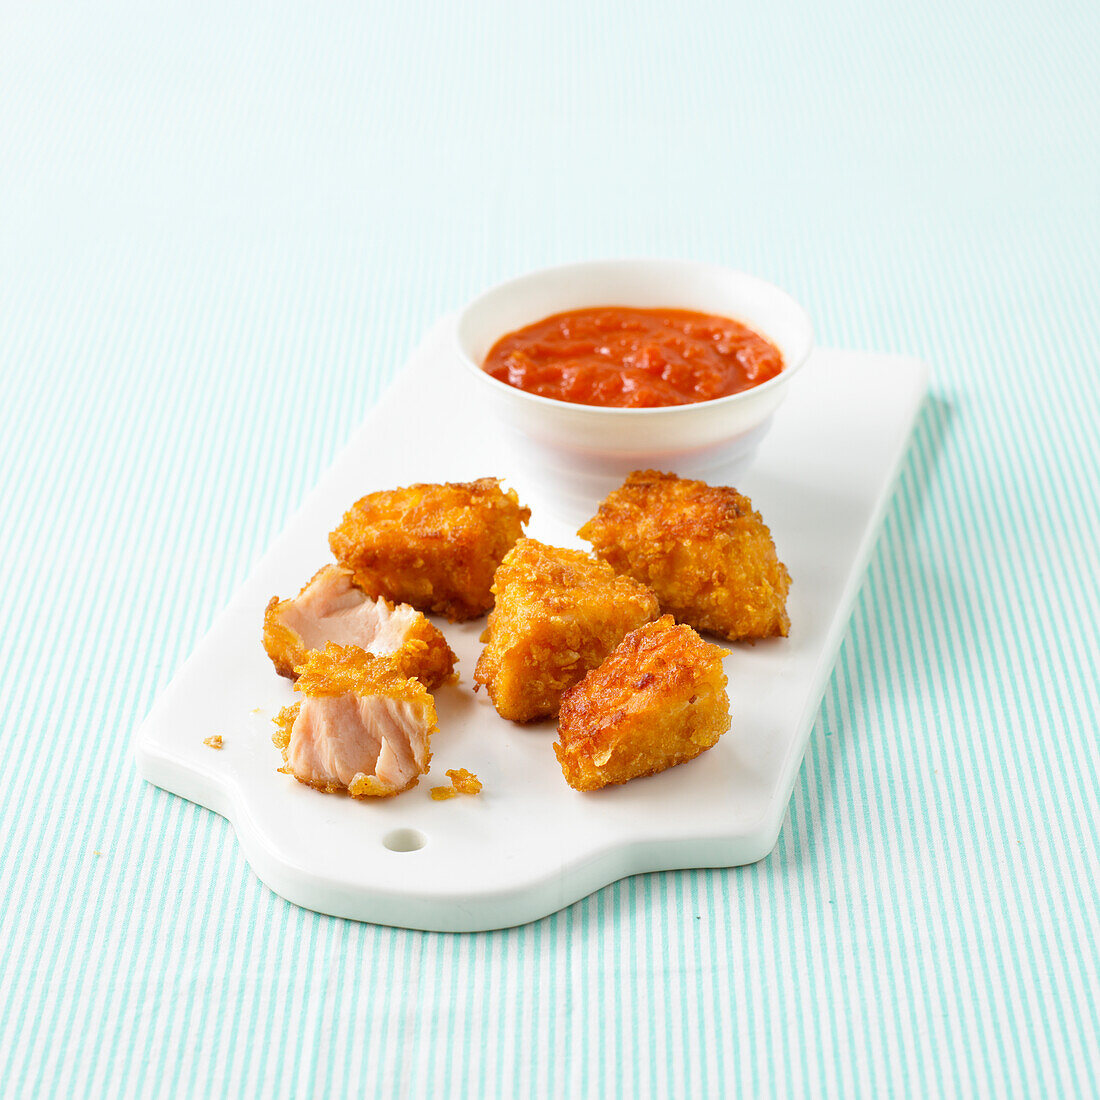 Salmon nuggets and salsa dip